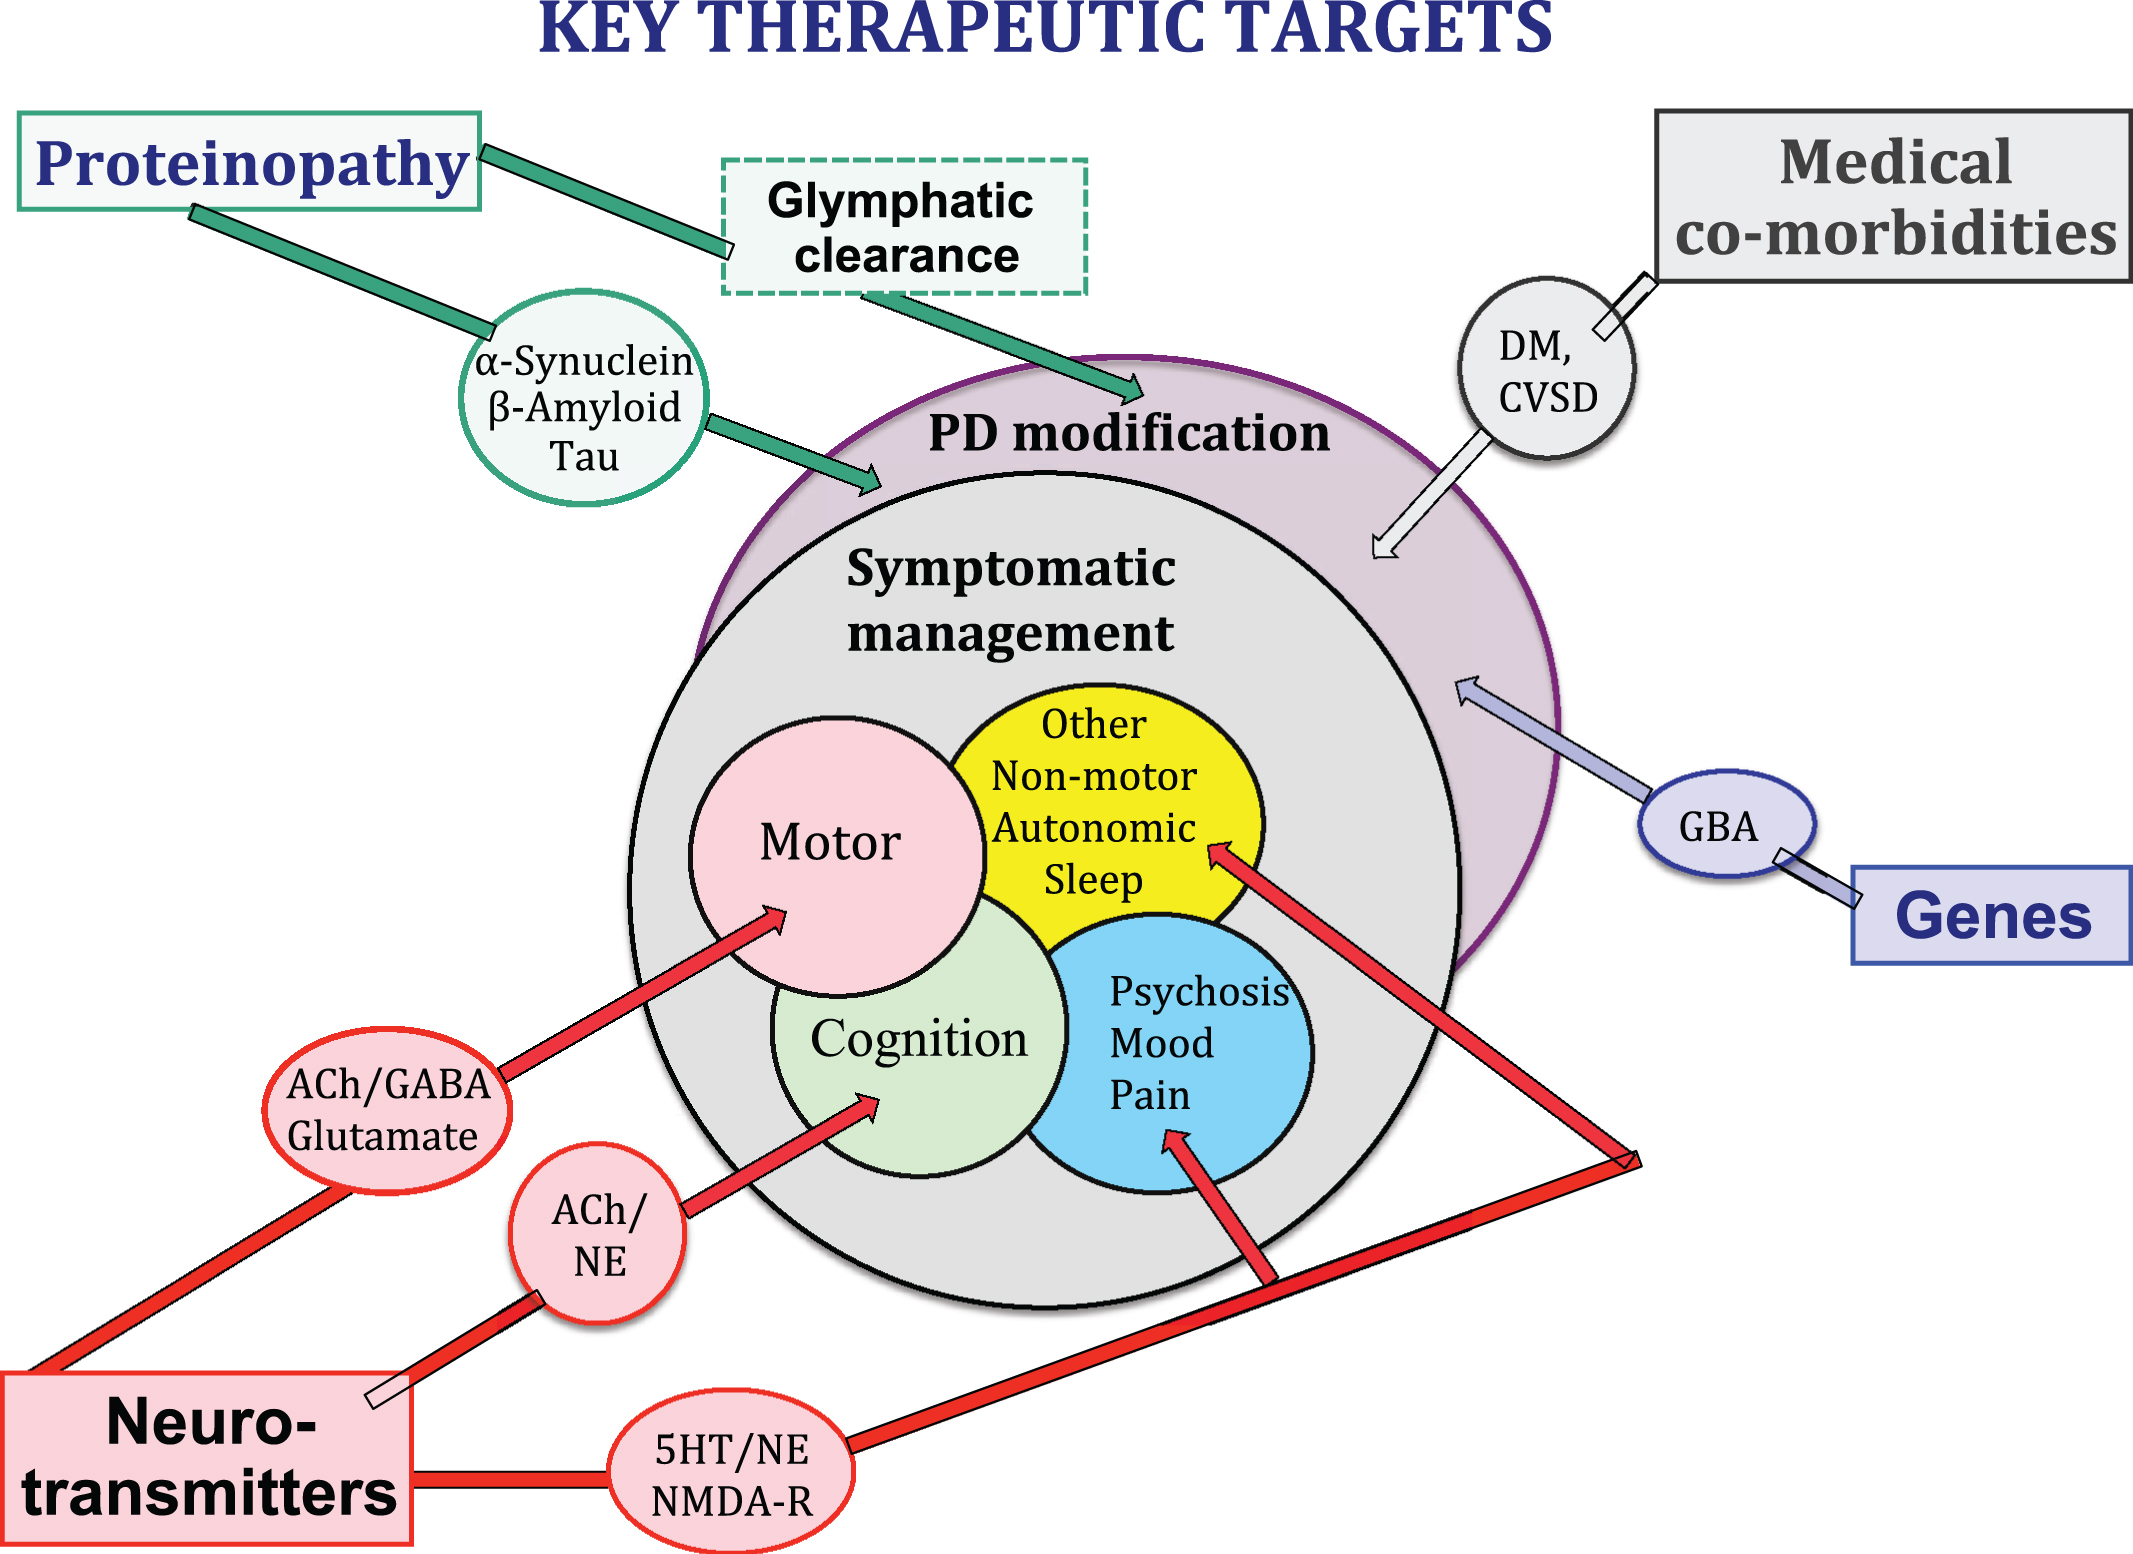 Neurotransmitter systems, proteonopathies, genes, CNS co-pathologies and medical co-morbidities all contribute to the clinical expression of the PD syndrome and may provide key therapeutic targets for symptomatic control of clinical symptoms and/or clinical disease modification.